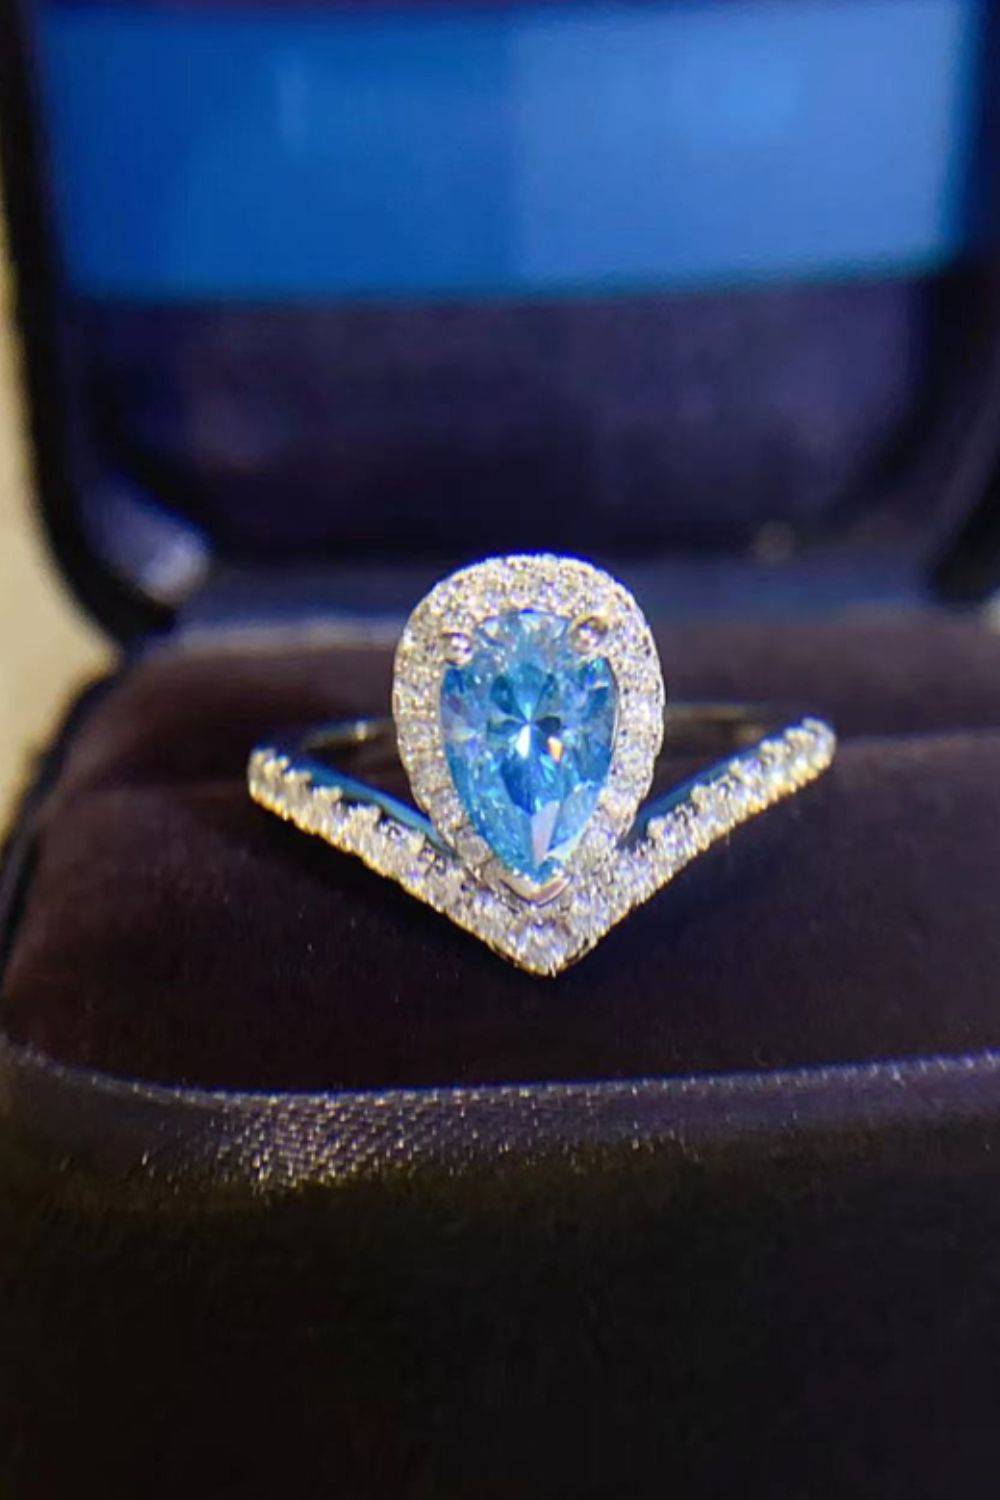 Heart of Love - Celebrate Your Unique Story with a Breathtaking Heart-Shaped Moissanite Ring - Sparkling Zircon Accents and Certificate of Stone Properties to Last Forever - Guy Christopher